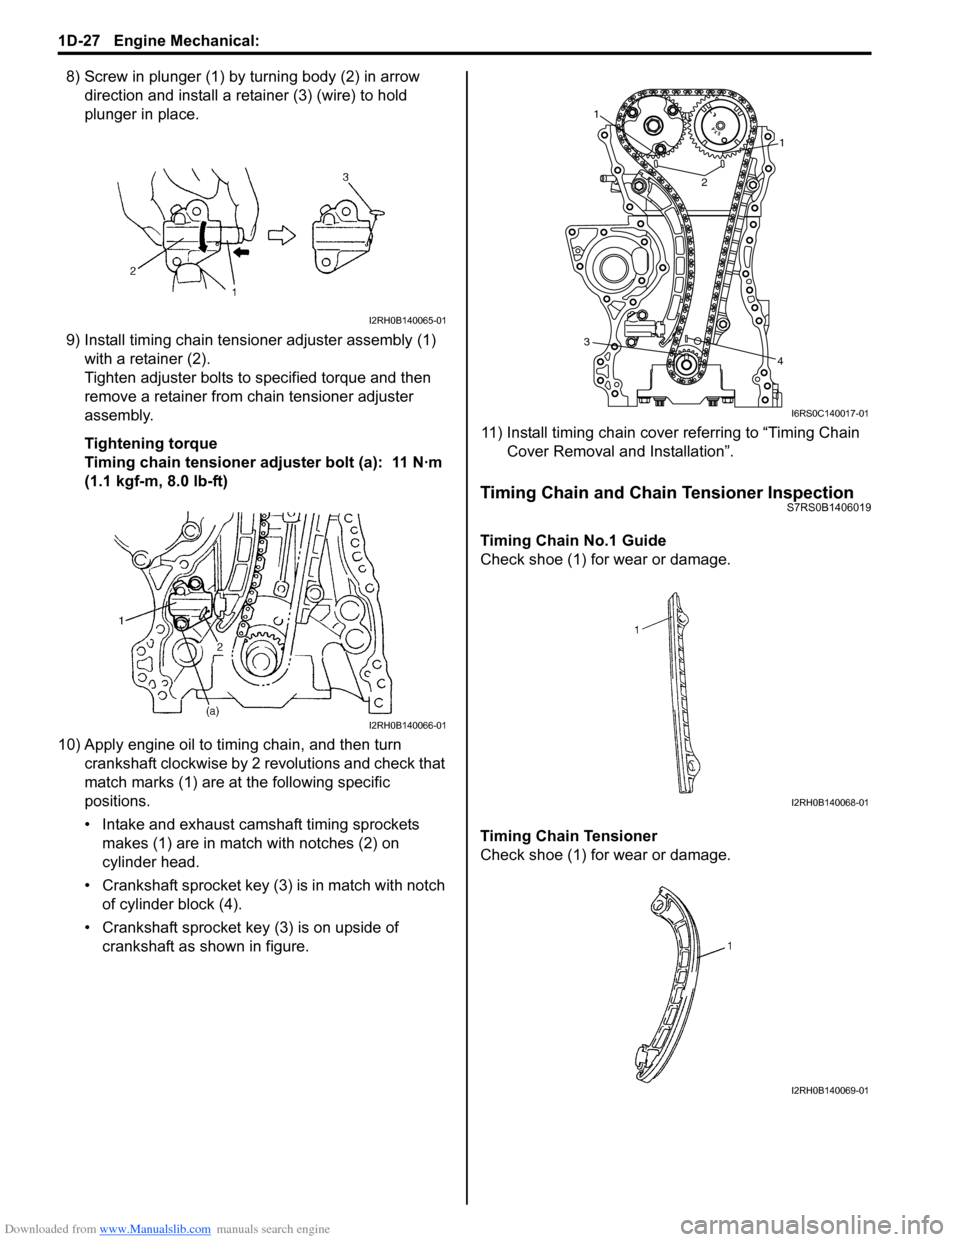 SUZUKI SWIFT 2004 2.G Service Workshop Manual Downloaded from www.Manualslib.com manuals search engine 1D-27 Engine Mechanical: 
8) Screw in plunger (1) by turning body (2) in arrow direction and install a reta iner (3) (wire) to hold 
plunger in